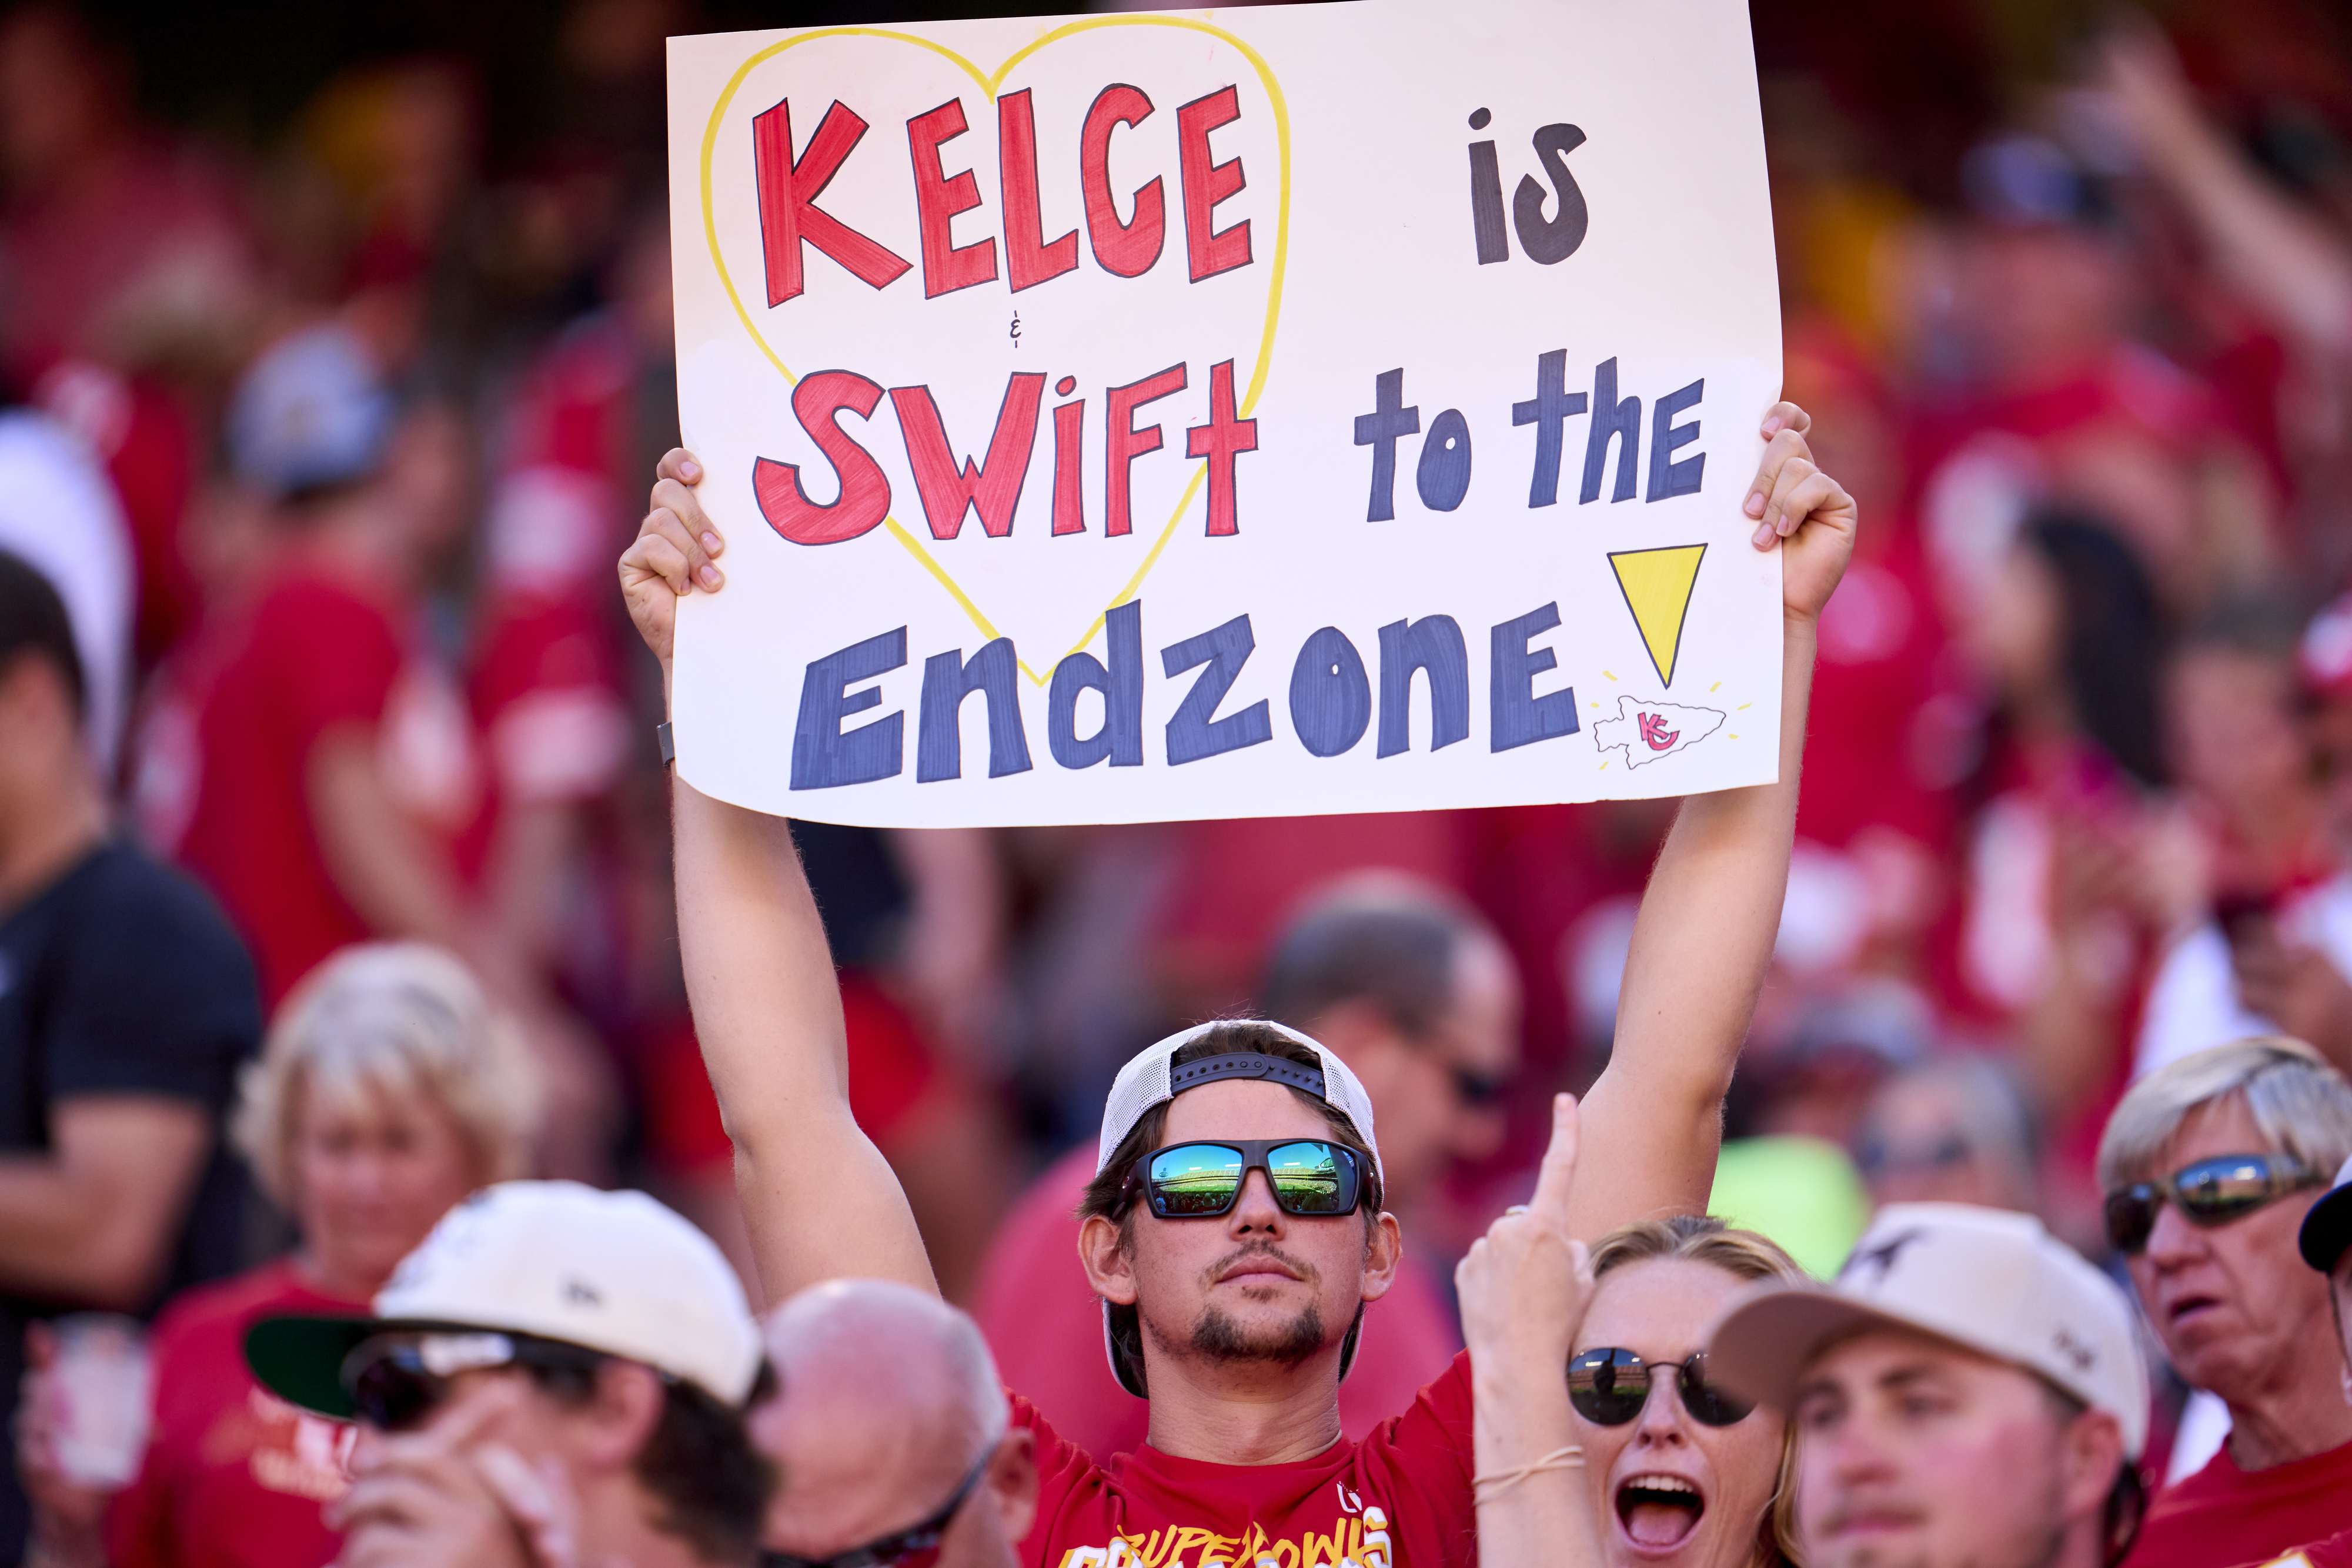 A fan holding a sign that says &quot;Kelce is Swift to the Endzone!&quot;